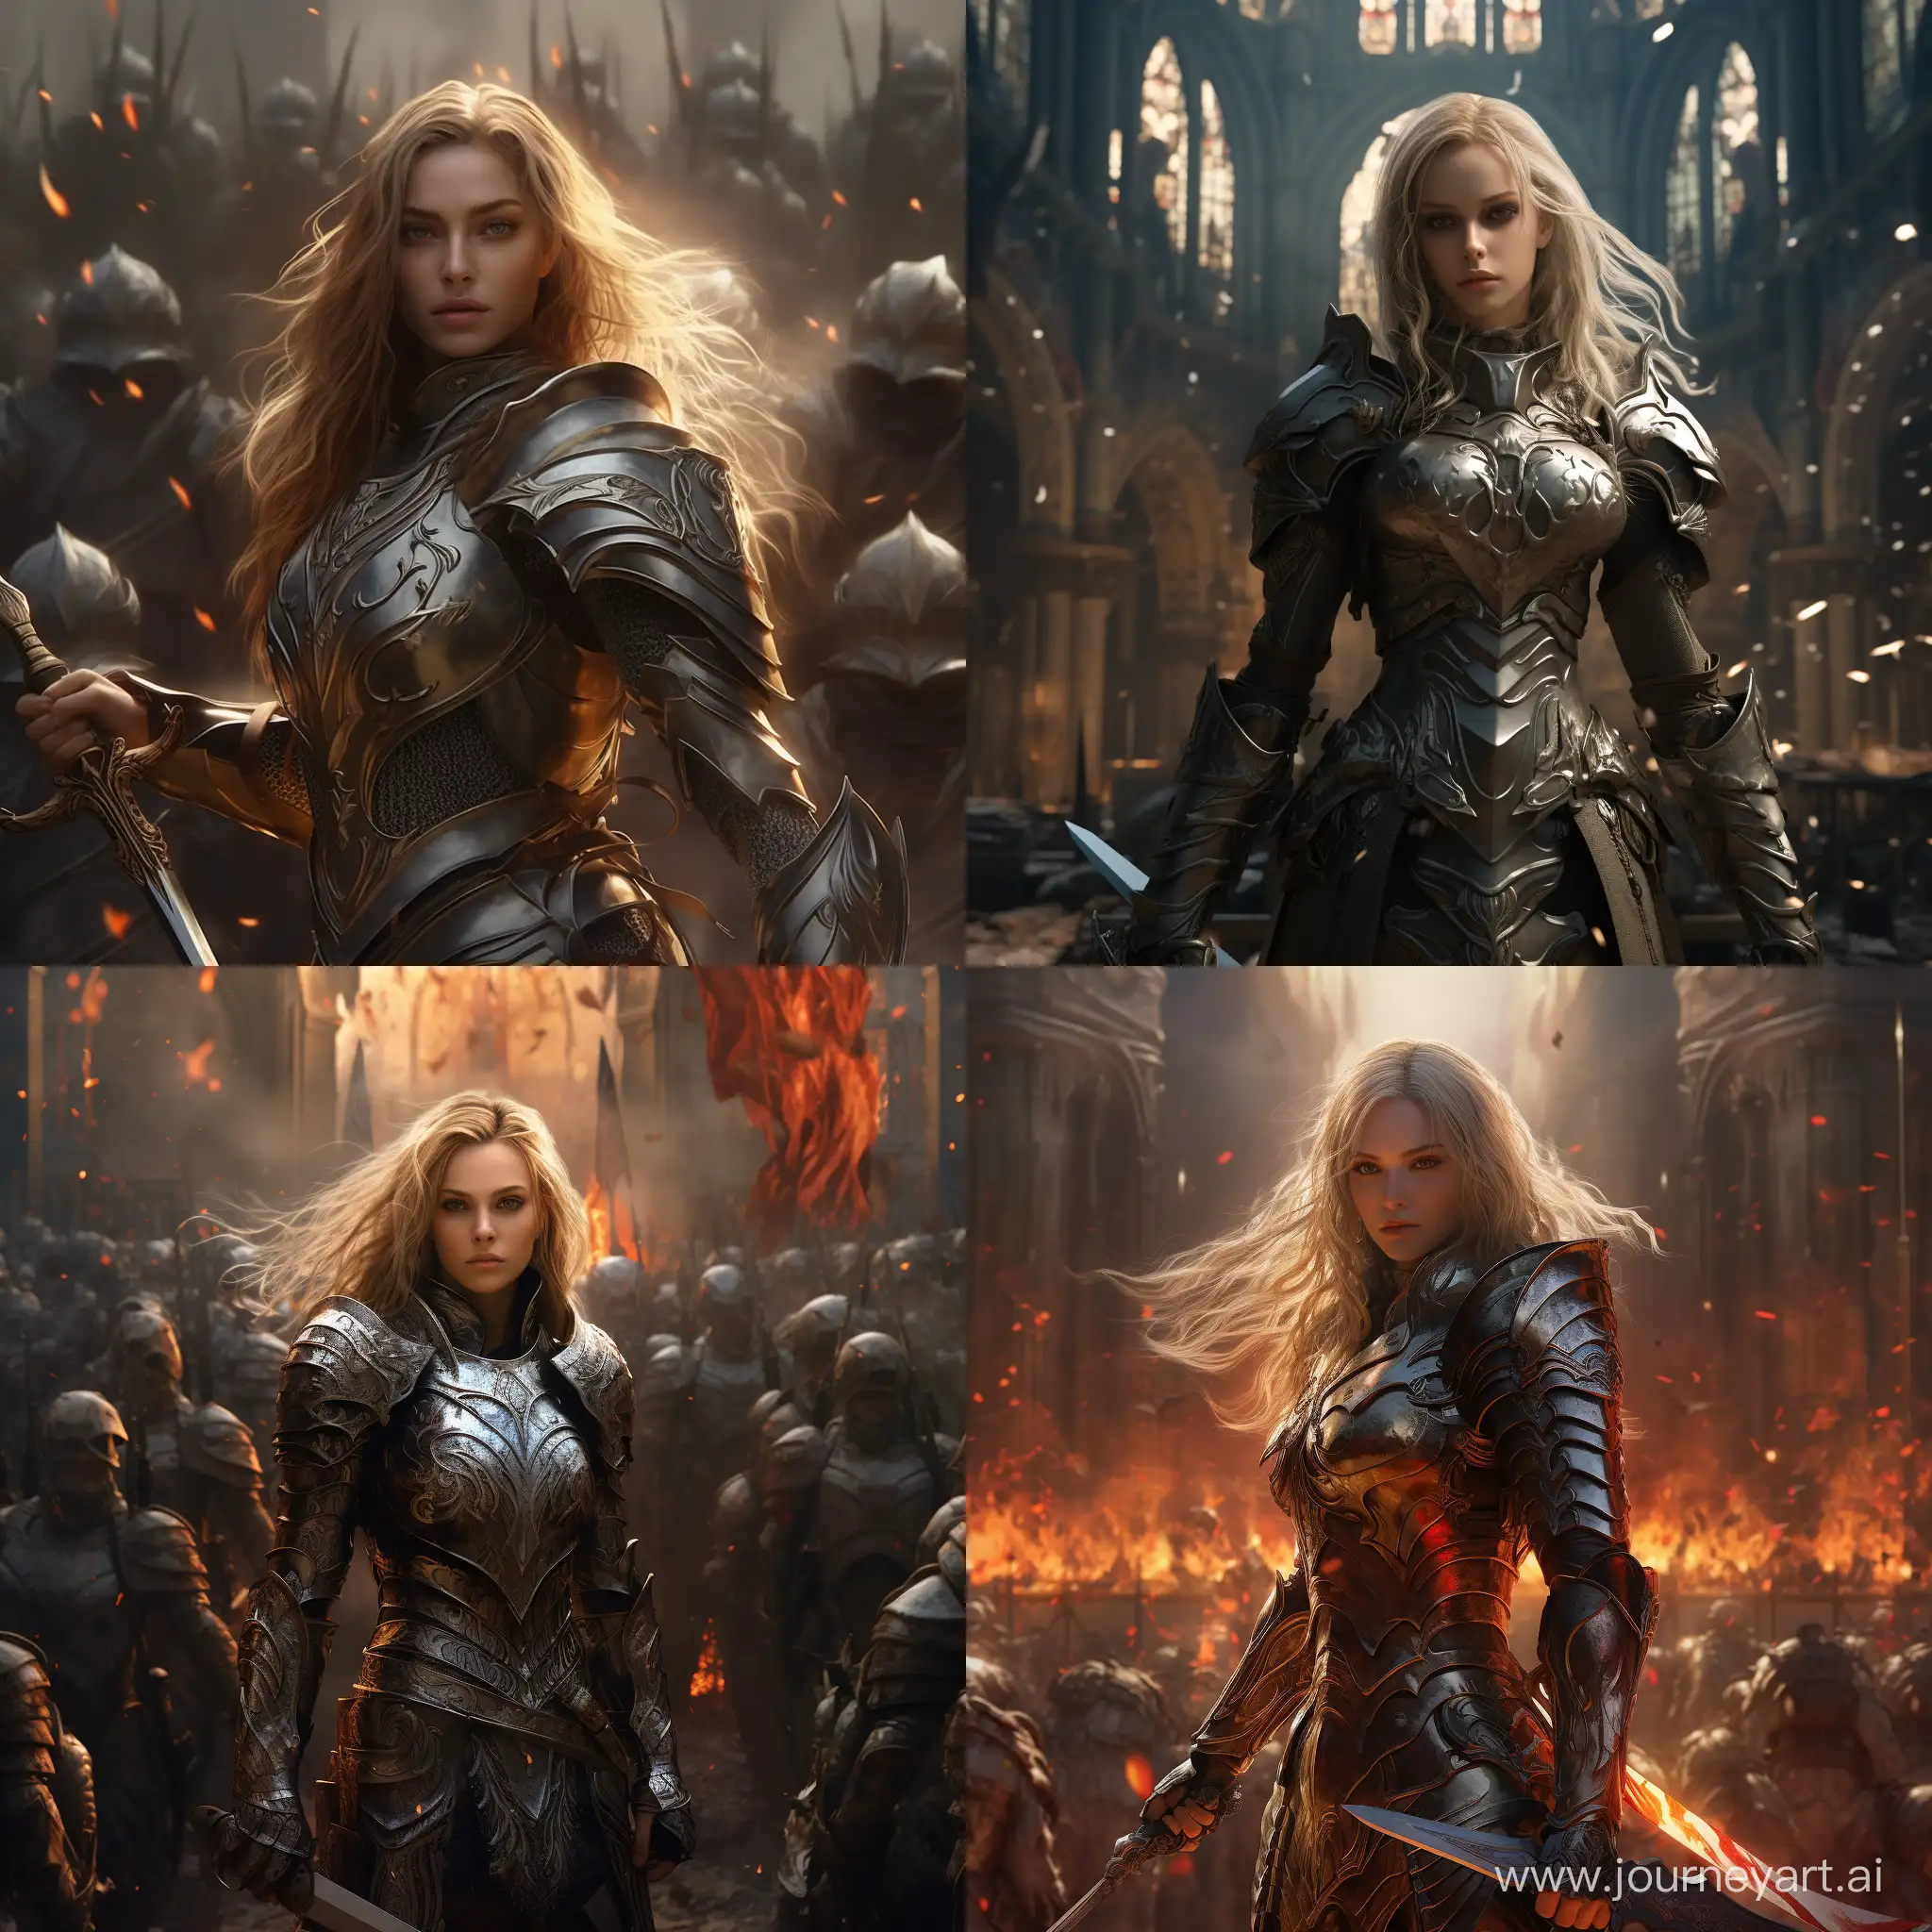 A Holy Female Knight in a high Fantasy setting during a giant battle in a realistic epic artstyle 